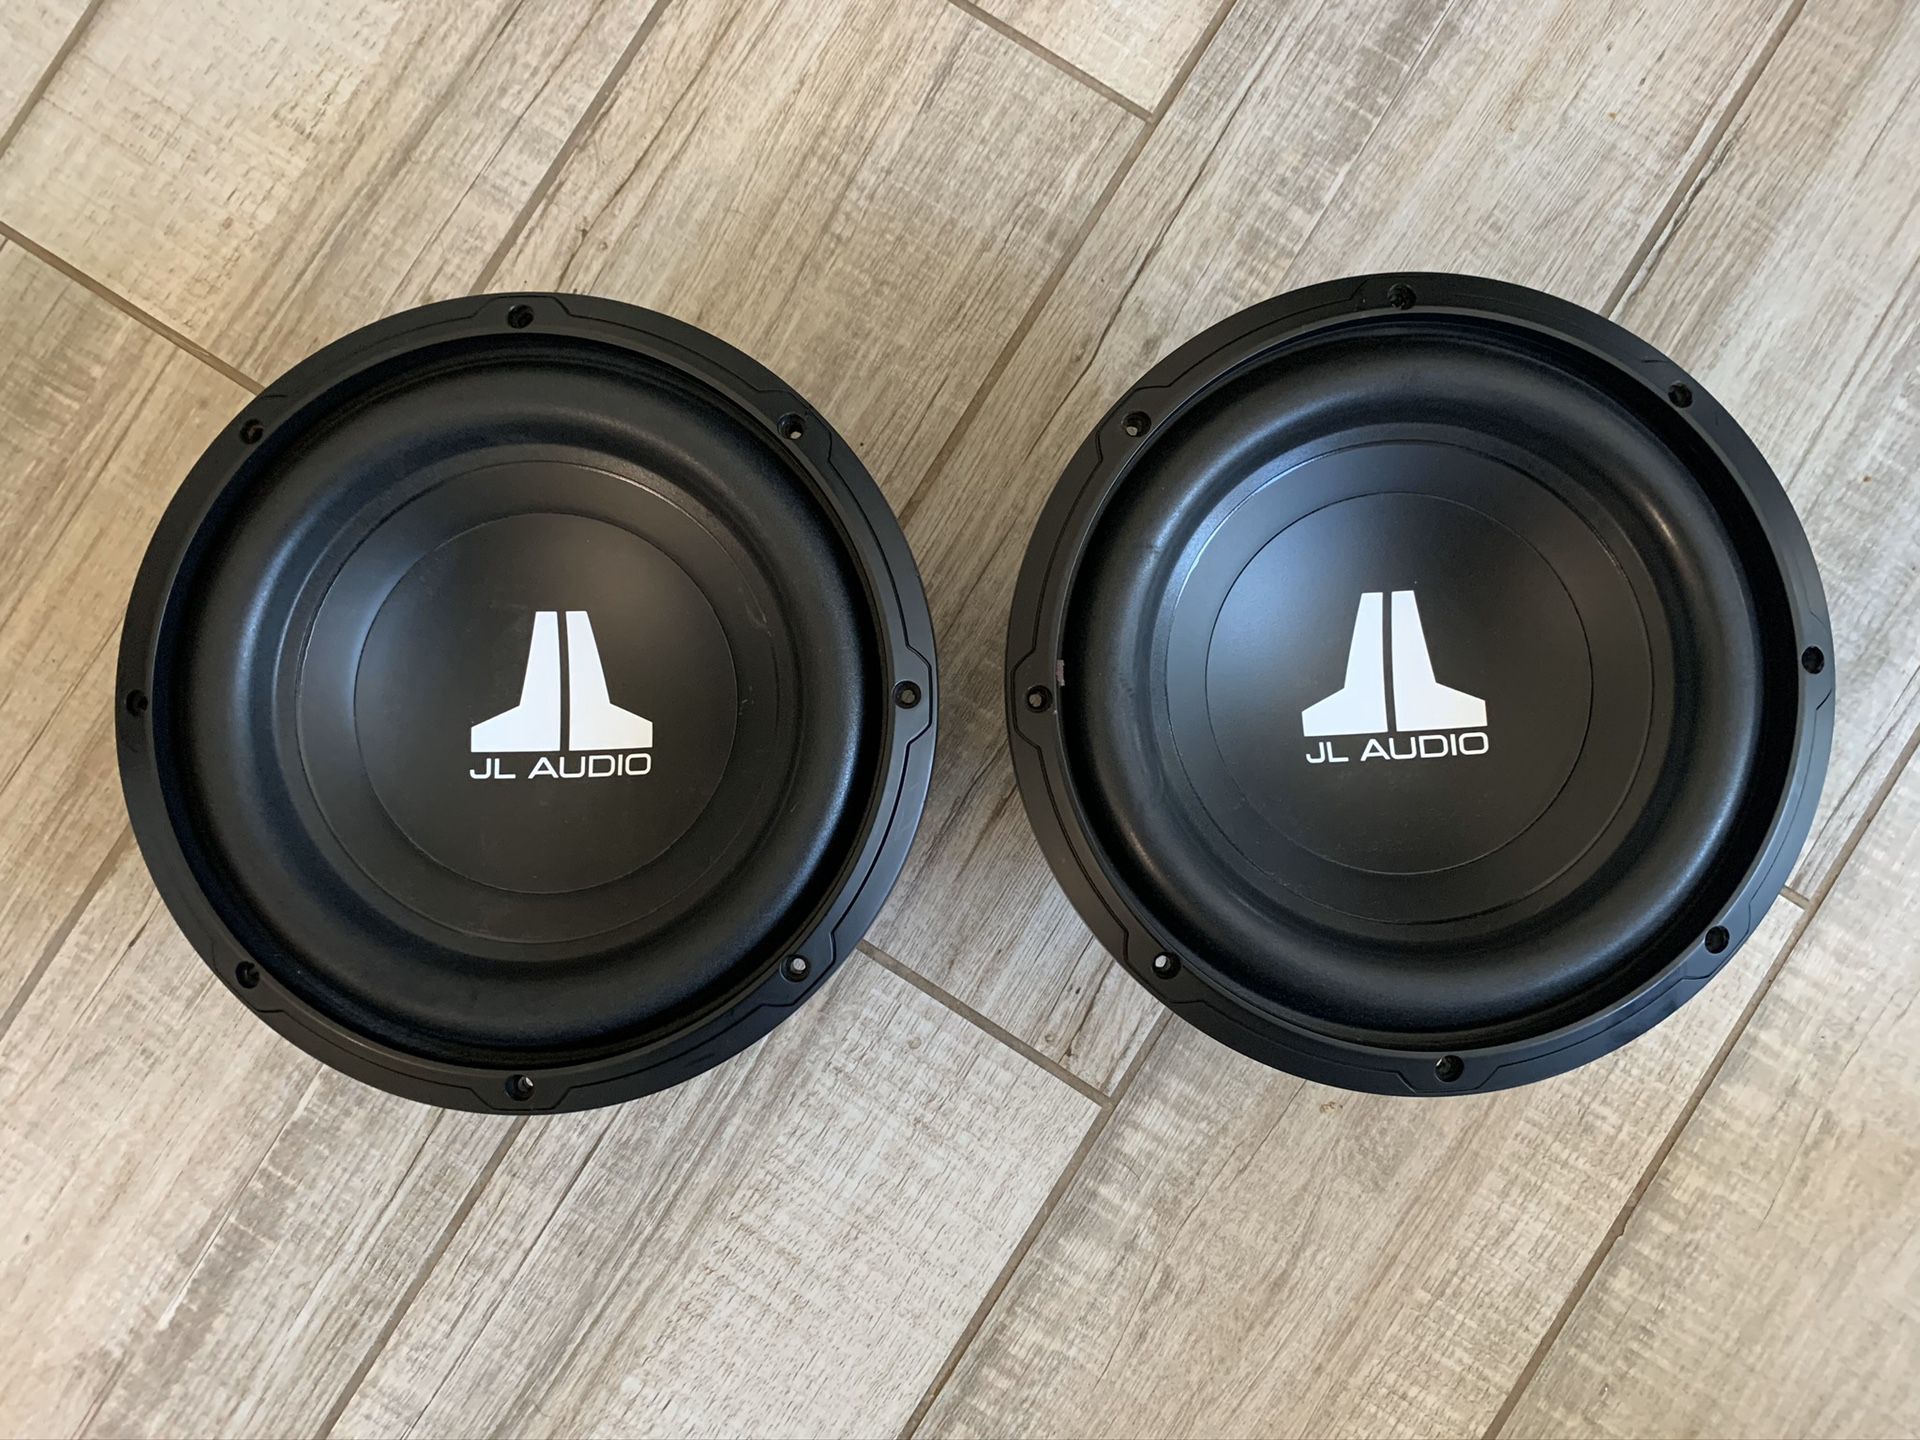 Two 10” JL Audio 10W0v3-4 subwoofers